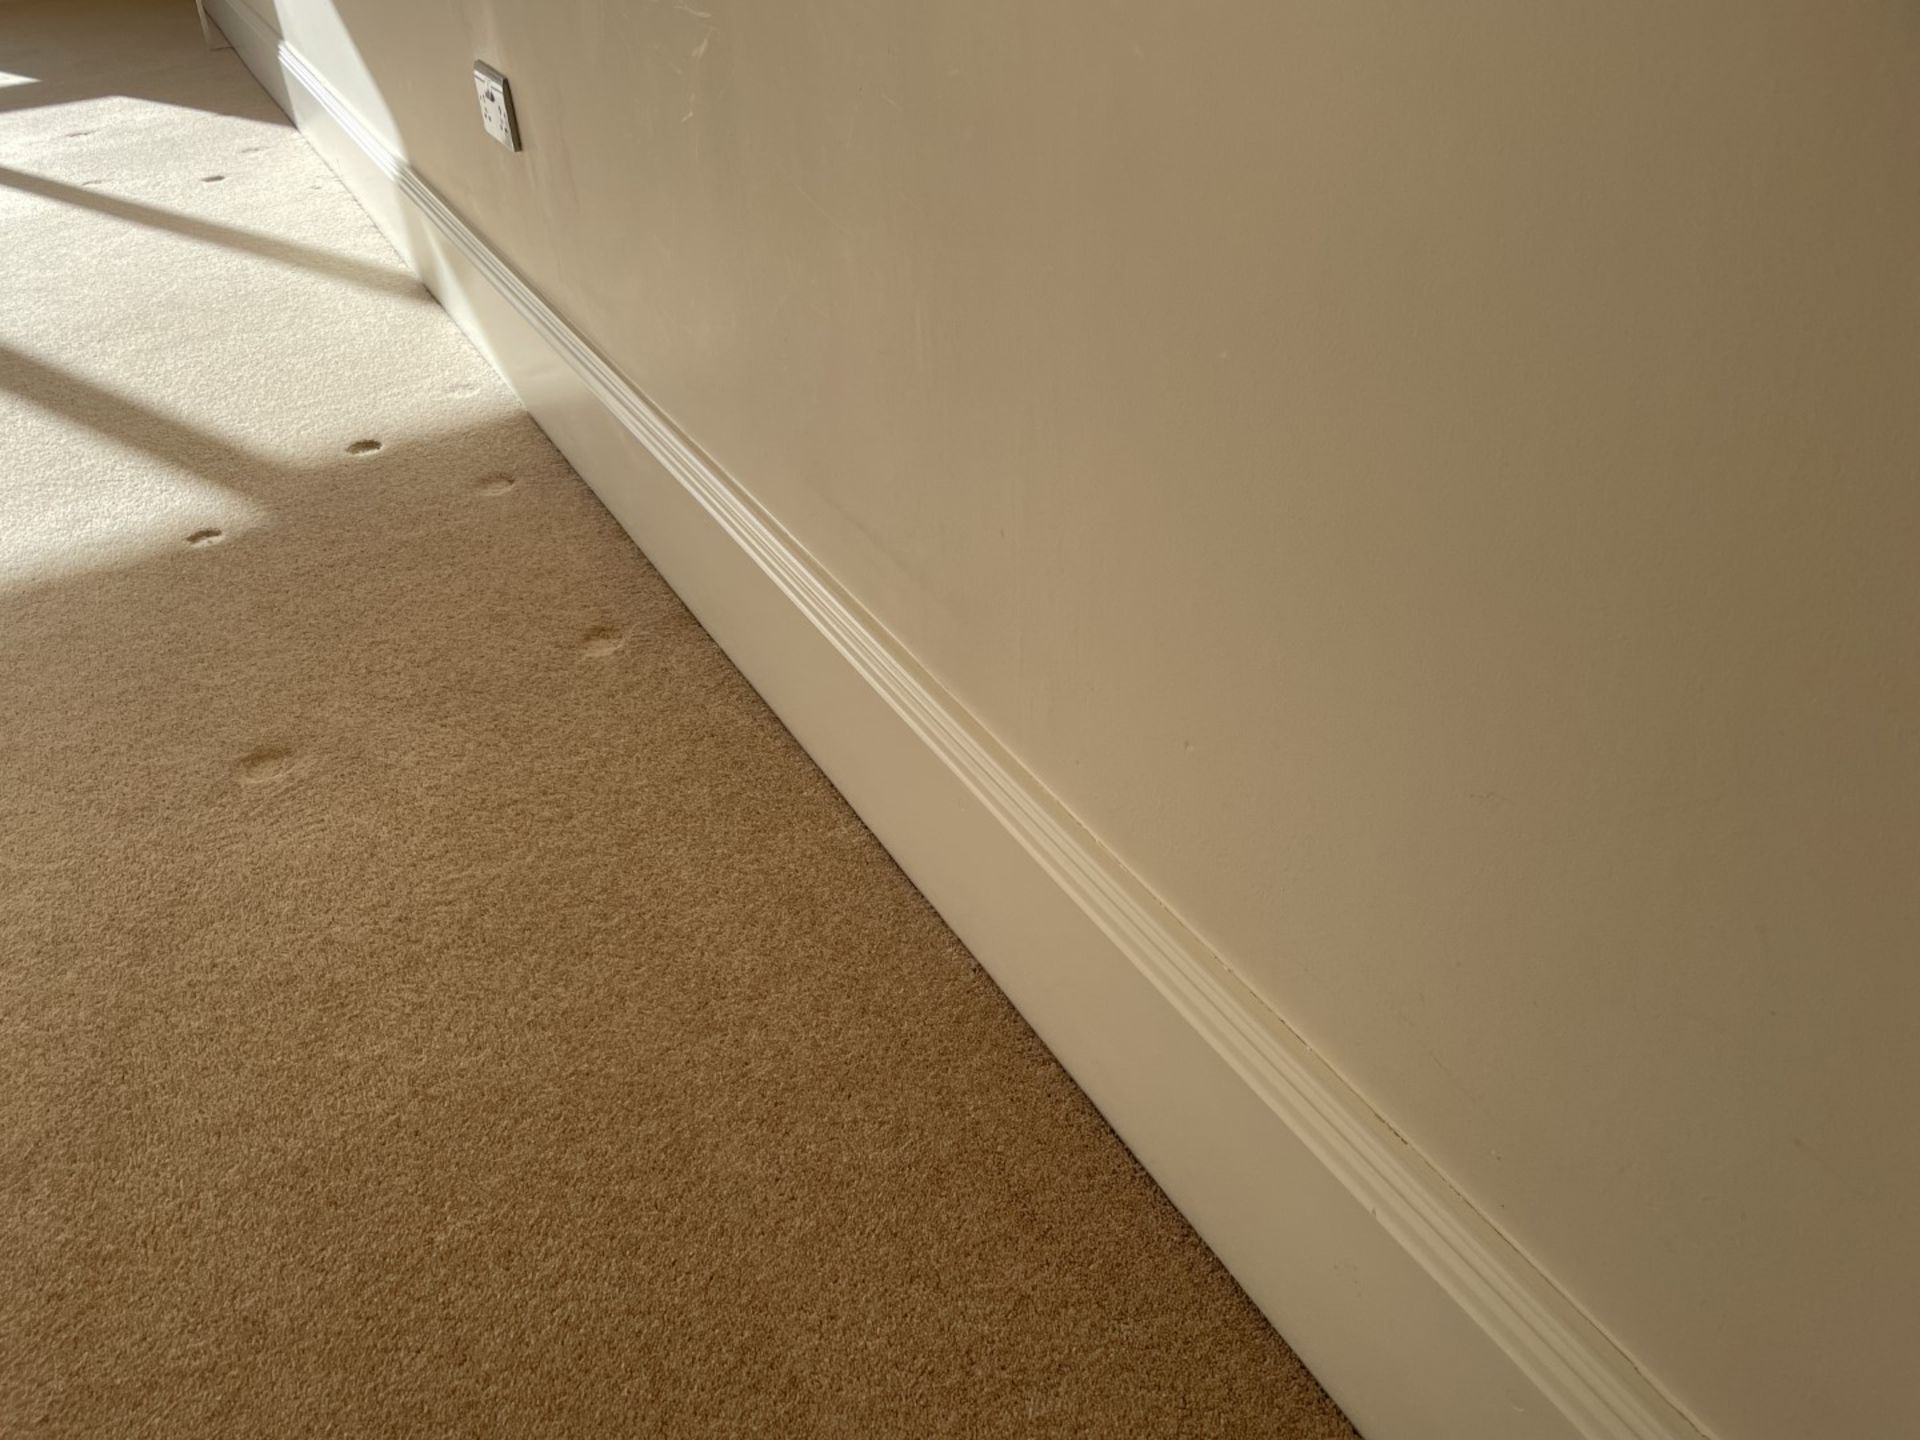 1 x Approximately 22-Metres of Painted Timber Wooden Skirting Boards, In White - Ref: PAN224 - CL896 - Image 10 of 10